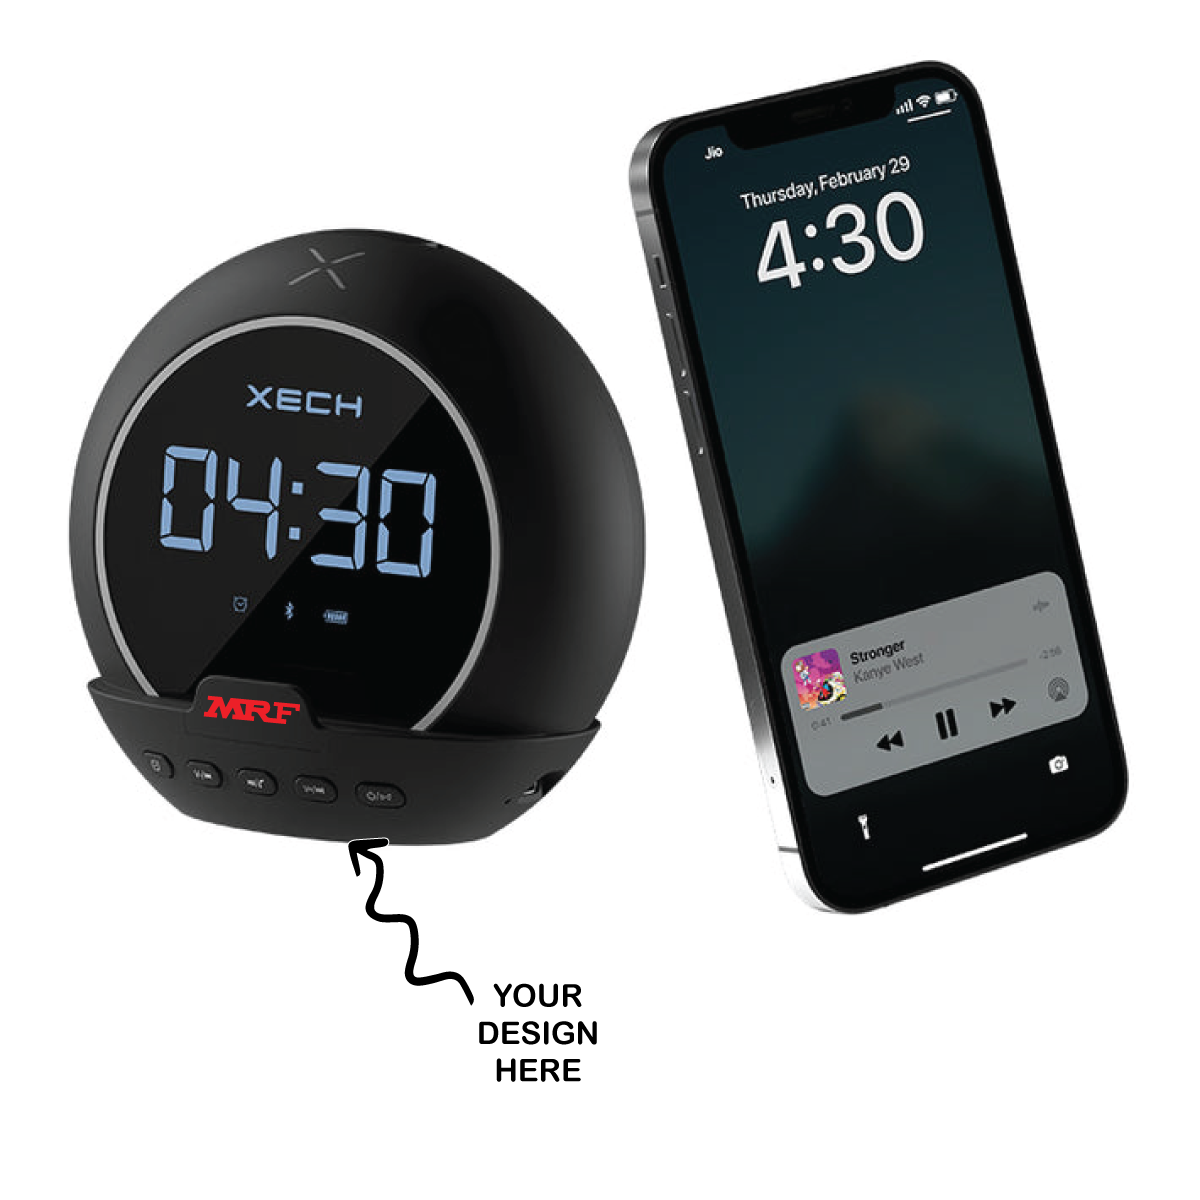 Personalized Wireless Bluetooth Speaker, Digital Clock, and Alarm - For Corporate Gifting, Office Gift Item, Return Gift, Event Gifts, Promotions